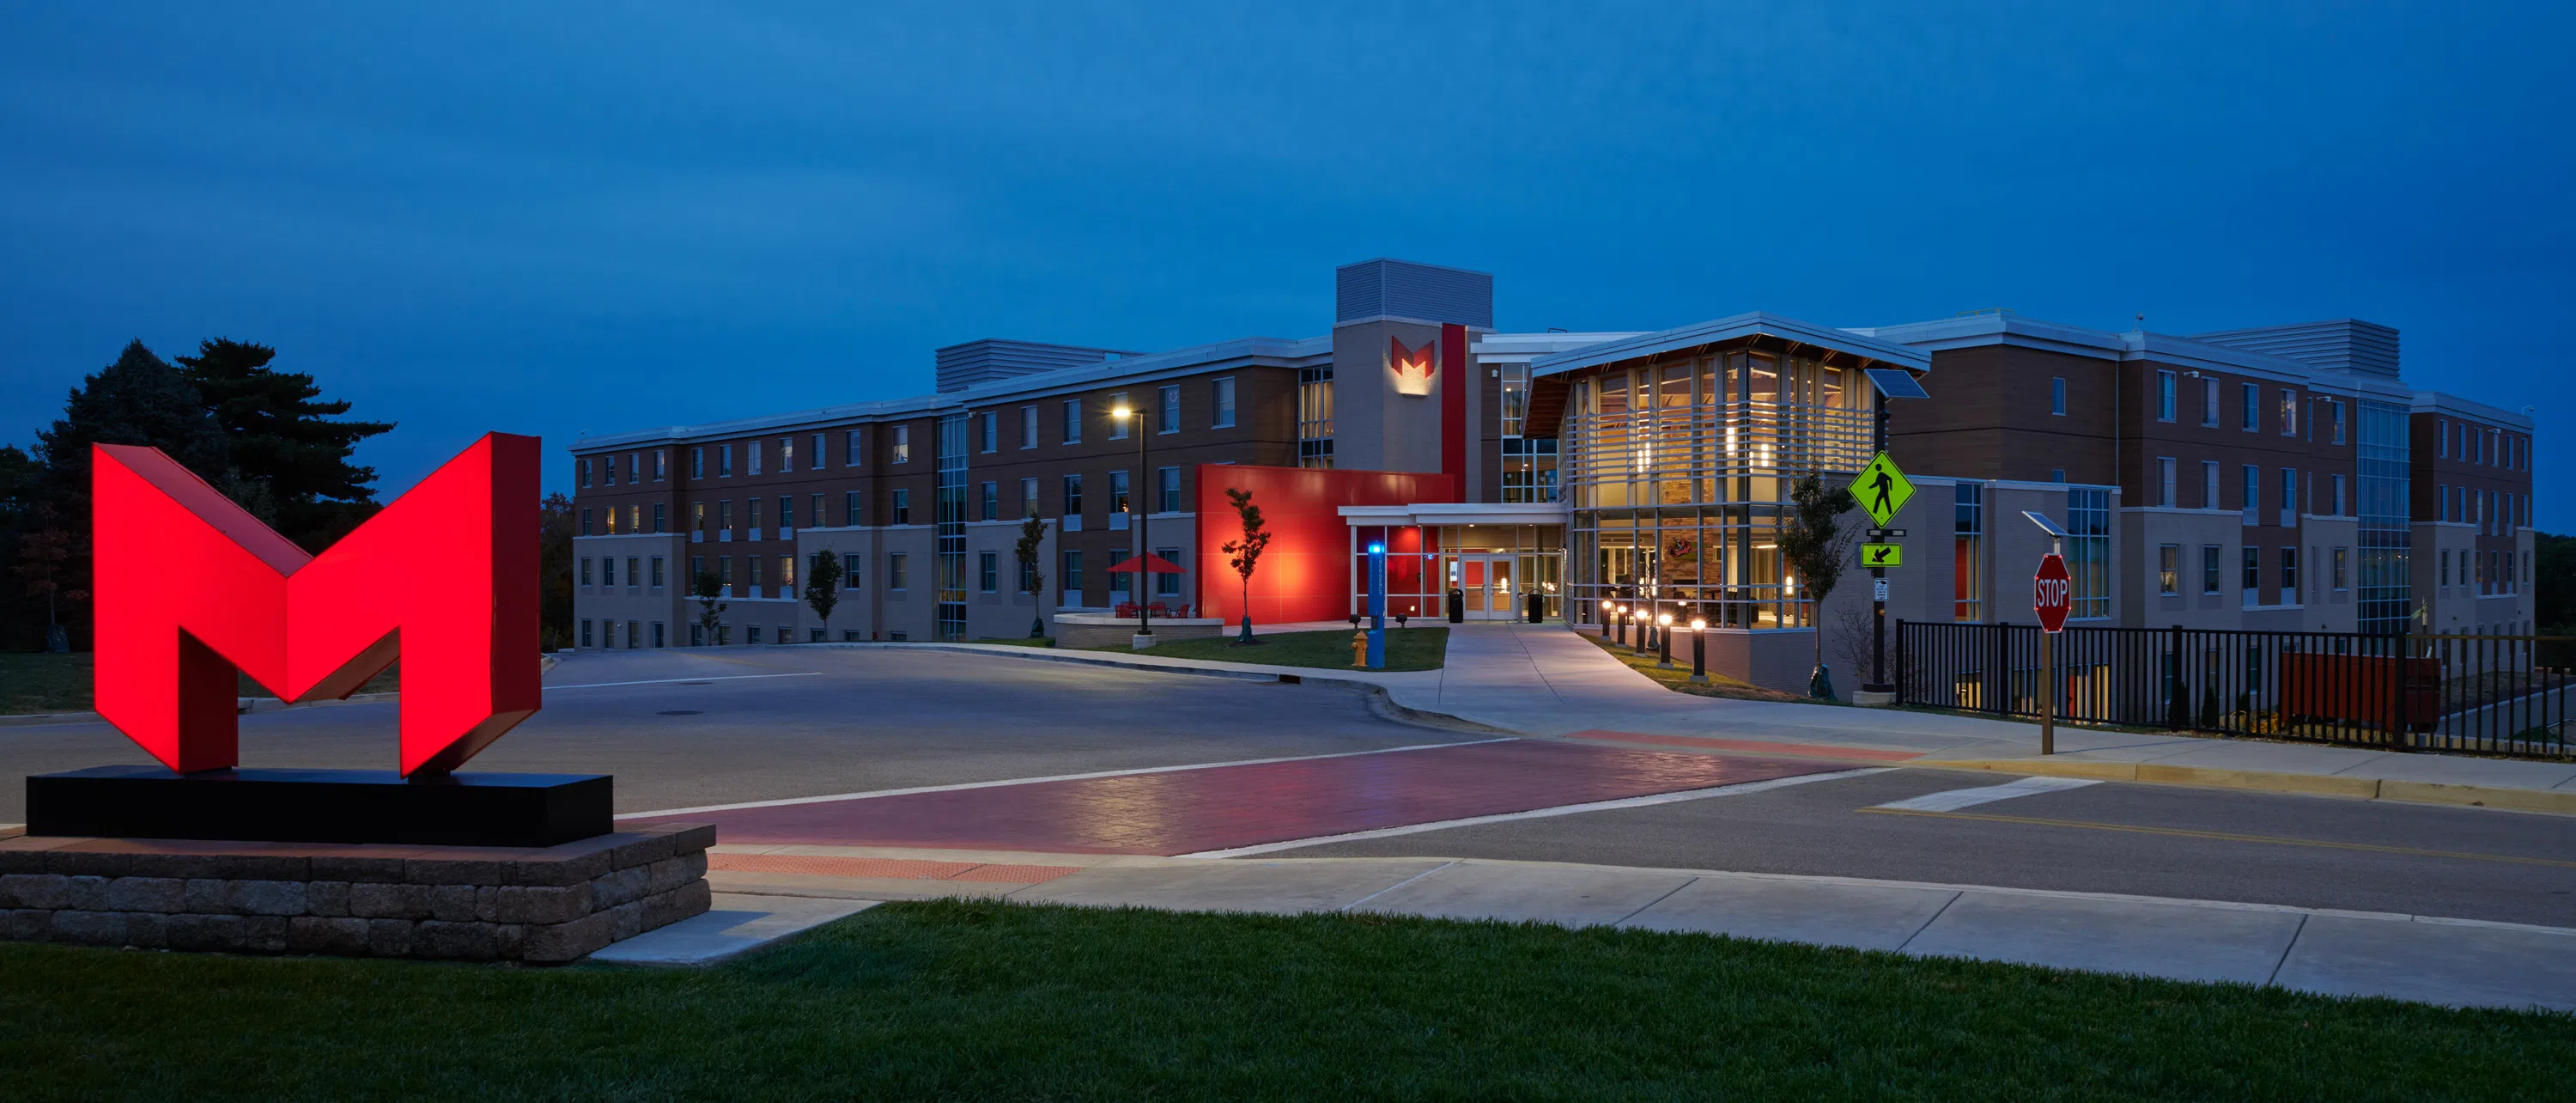 Saints Hall exterior (night) with glowing "Big Red M."